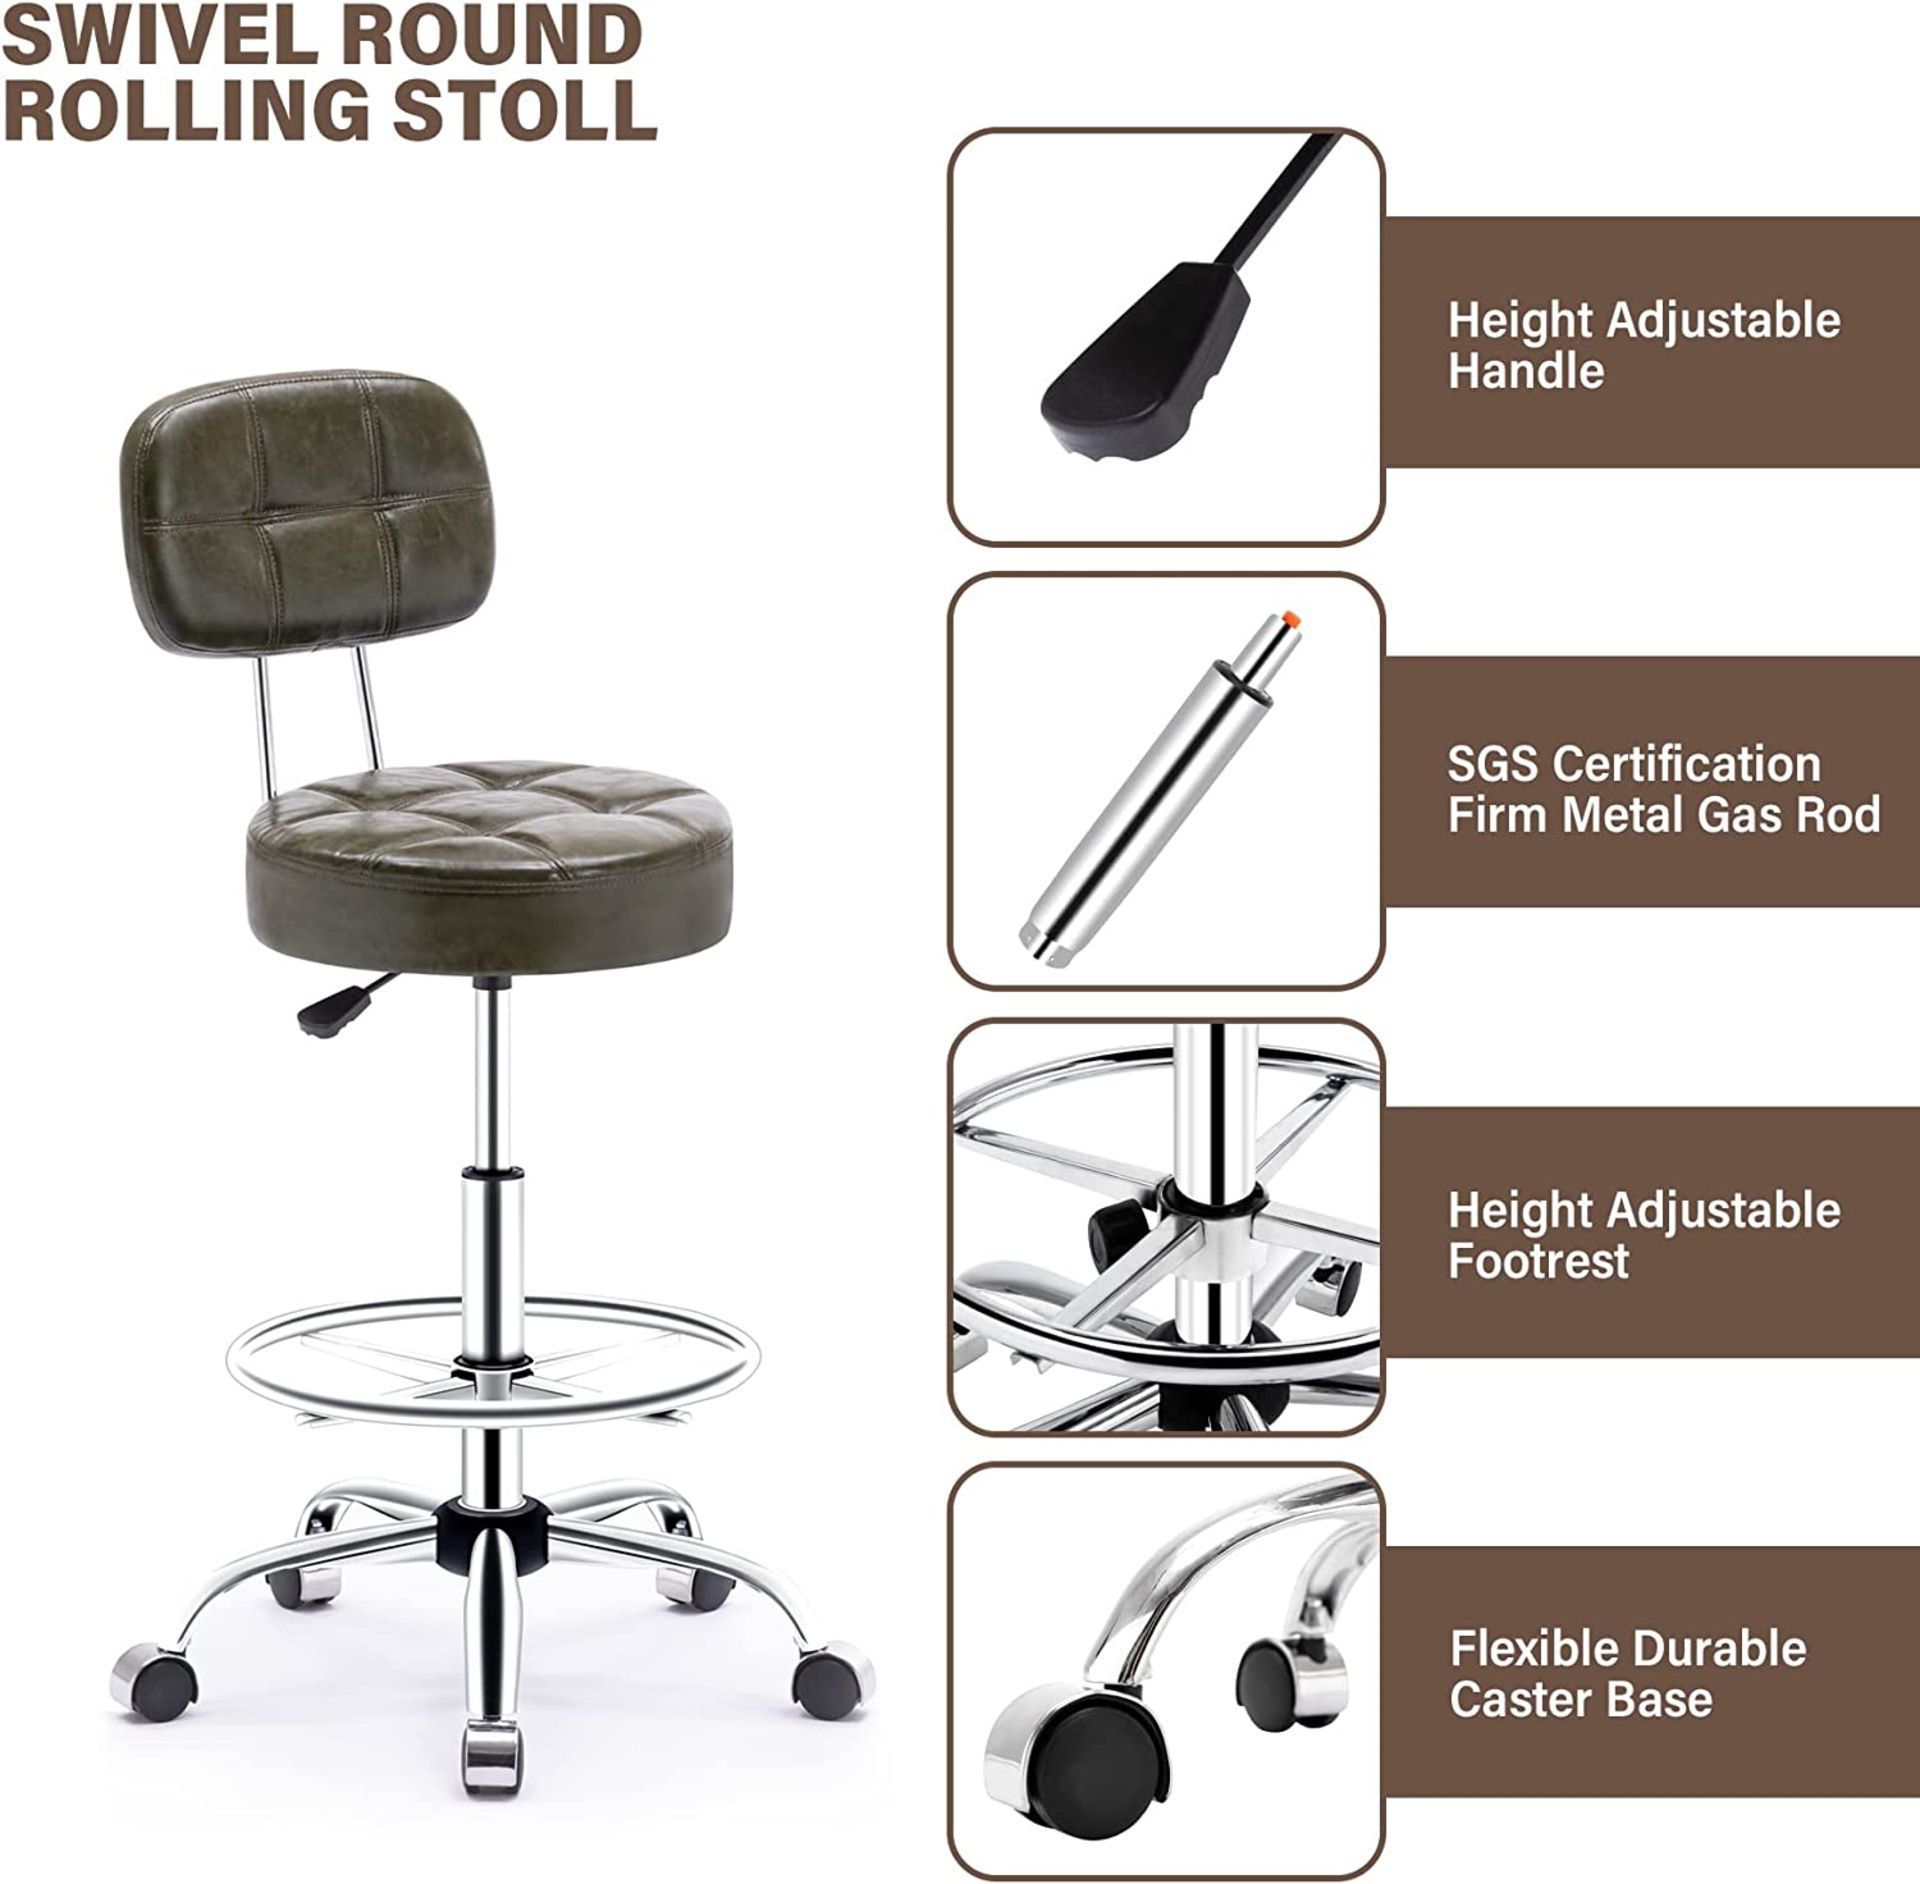 NEW Rolling stool with High Backrest and Adjustable Footrest, Leather Massage Stool Ergonomic - Image 2 of 4